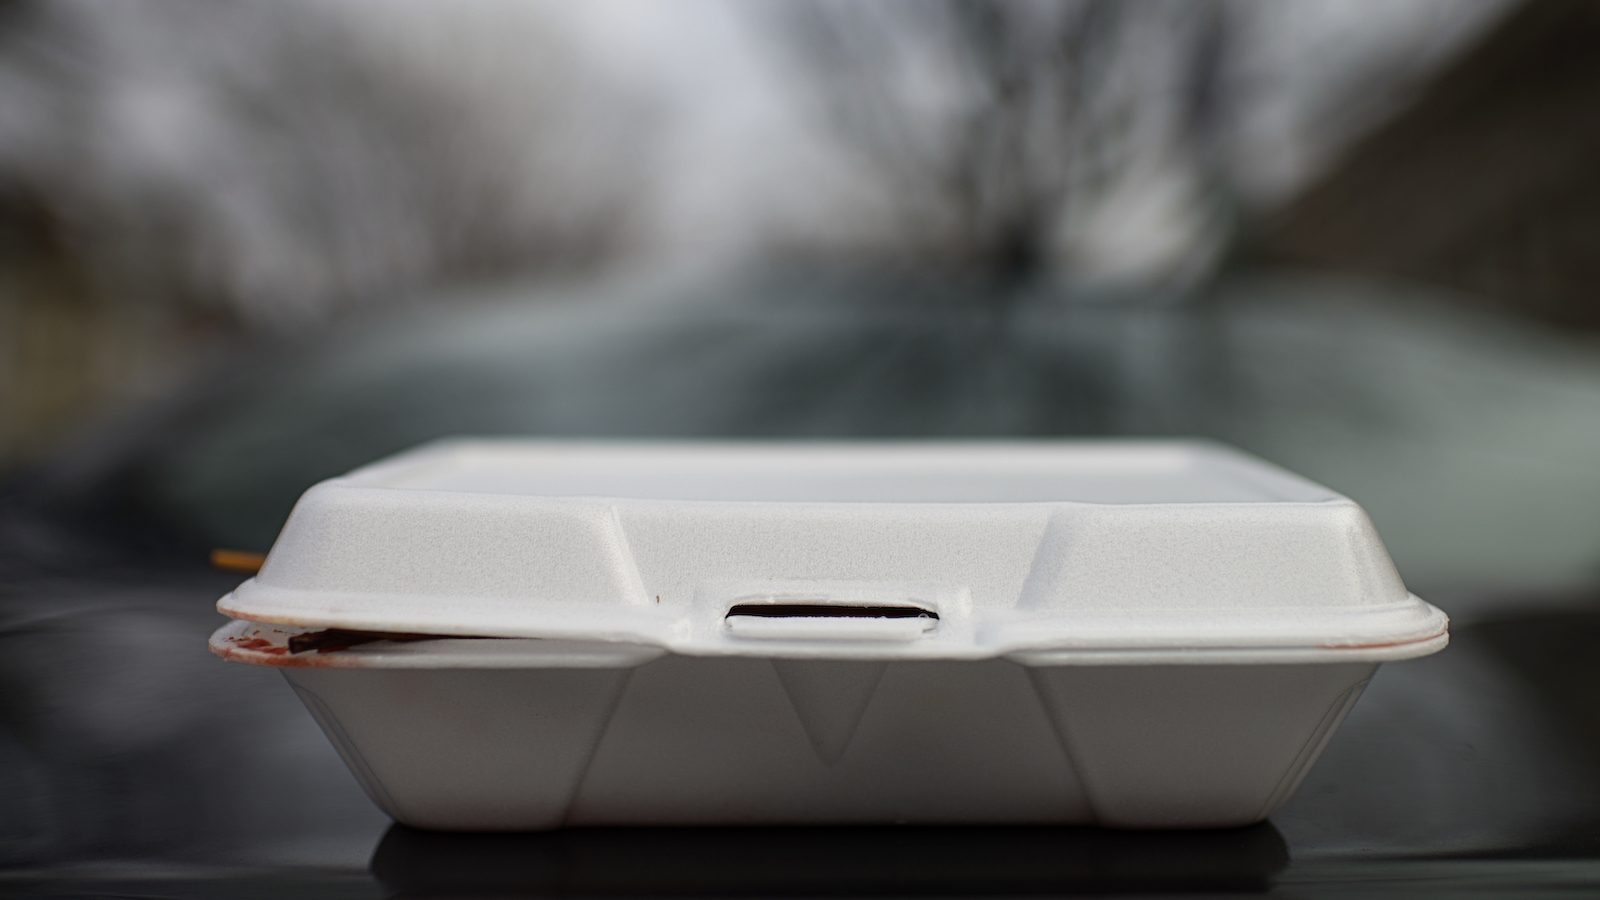 A white polystyrene food container